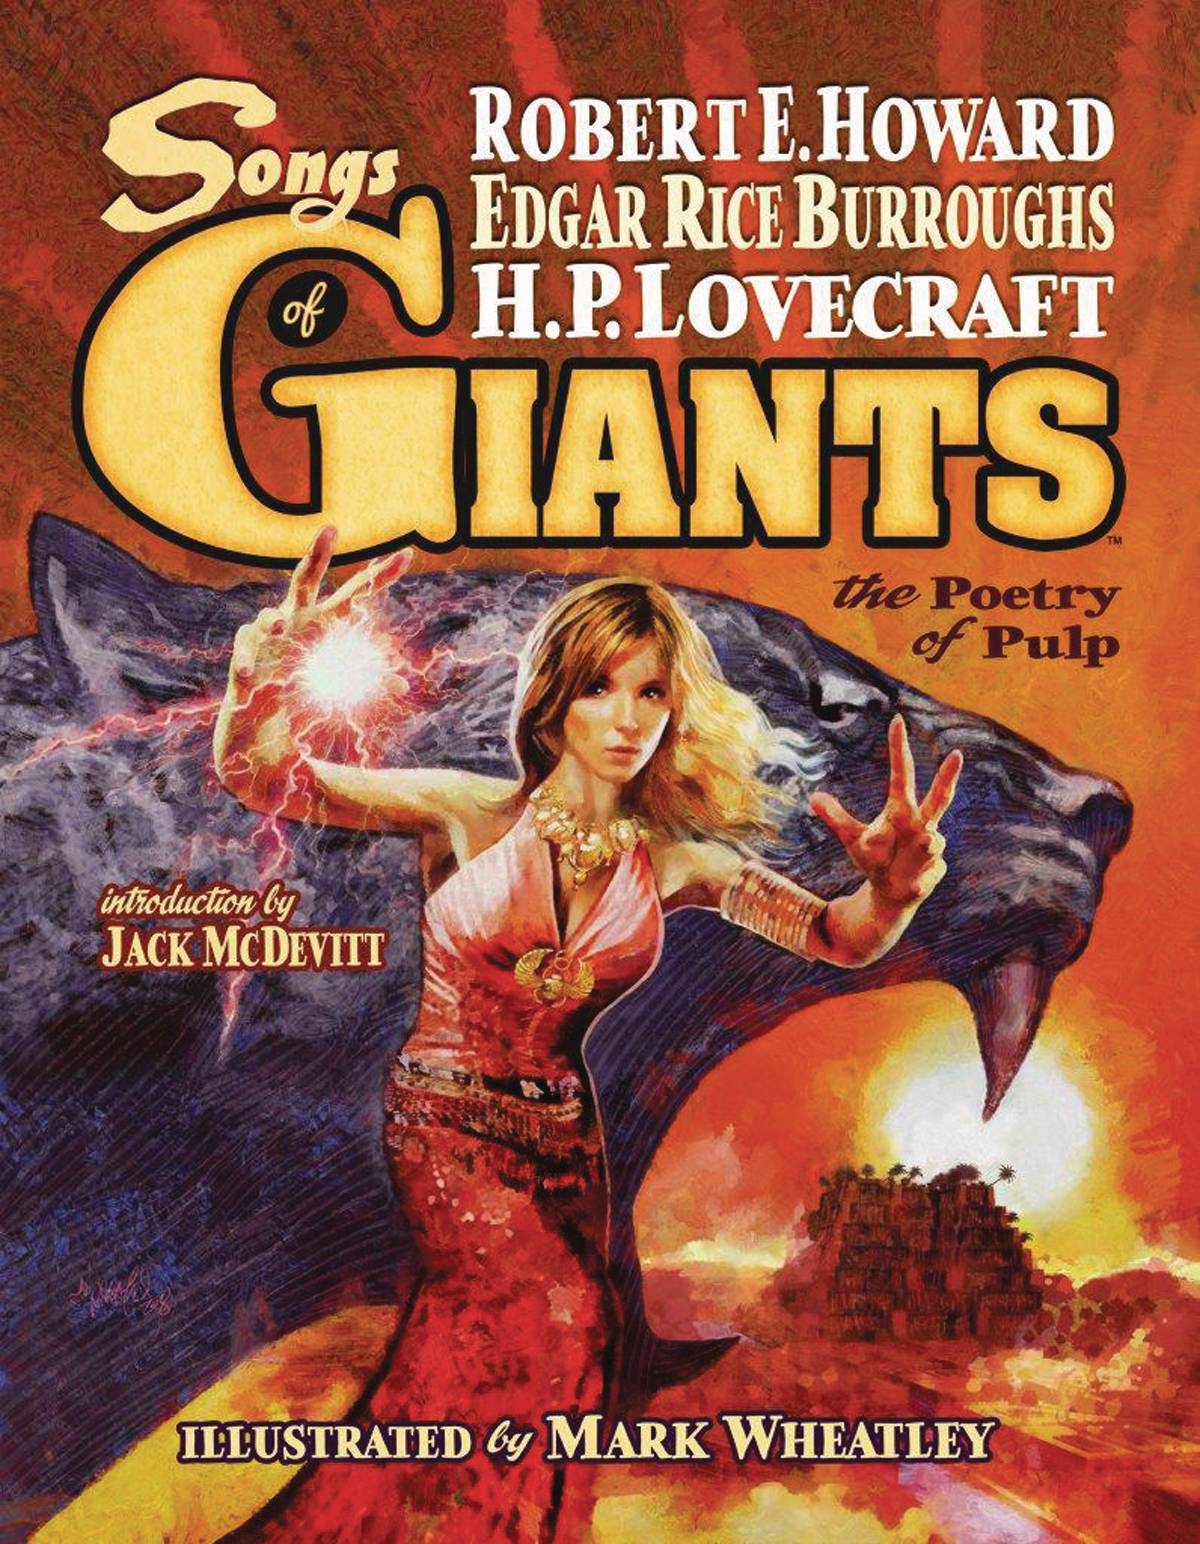 Songs of Giants Poetry of Pulp Limited Hardcover